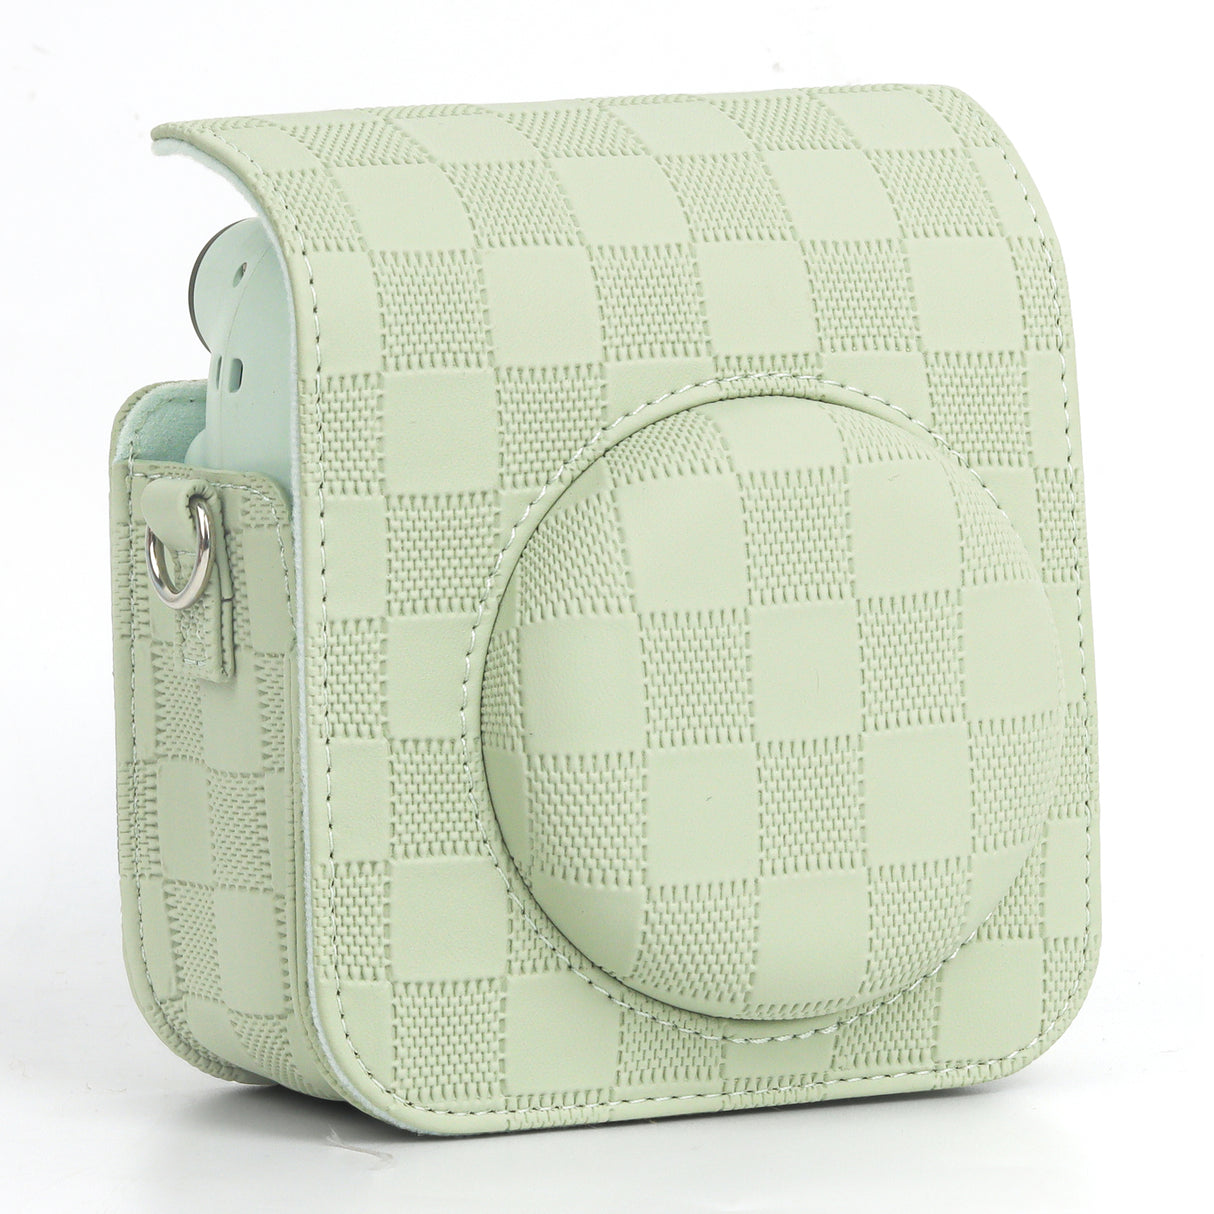 Zikkon Instax Mini 12 Protective Camera Case PU Leather Checkerboard Style Carrying Bag Green